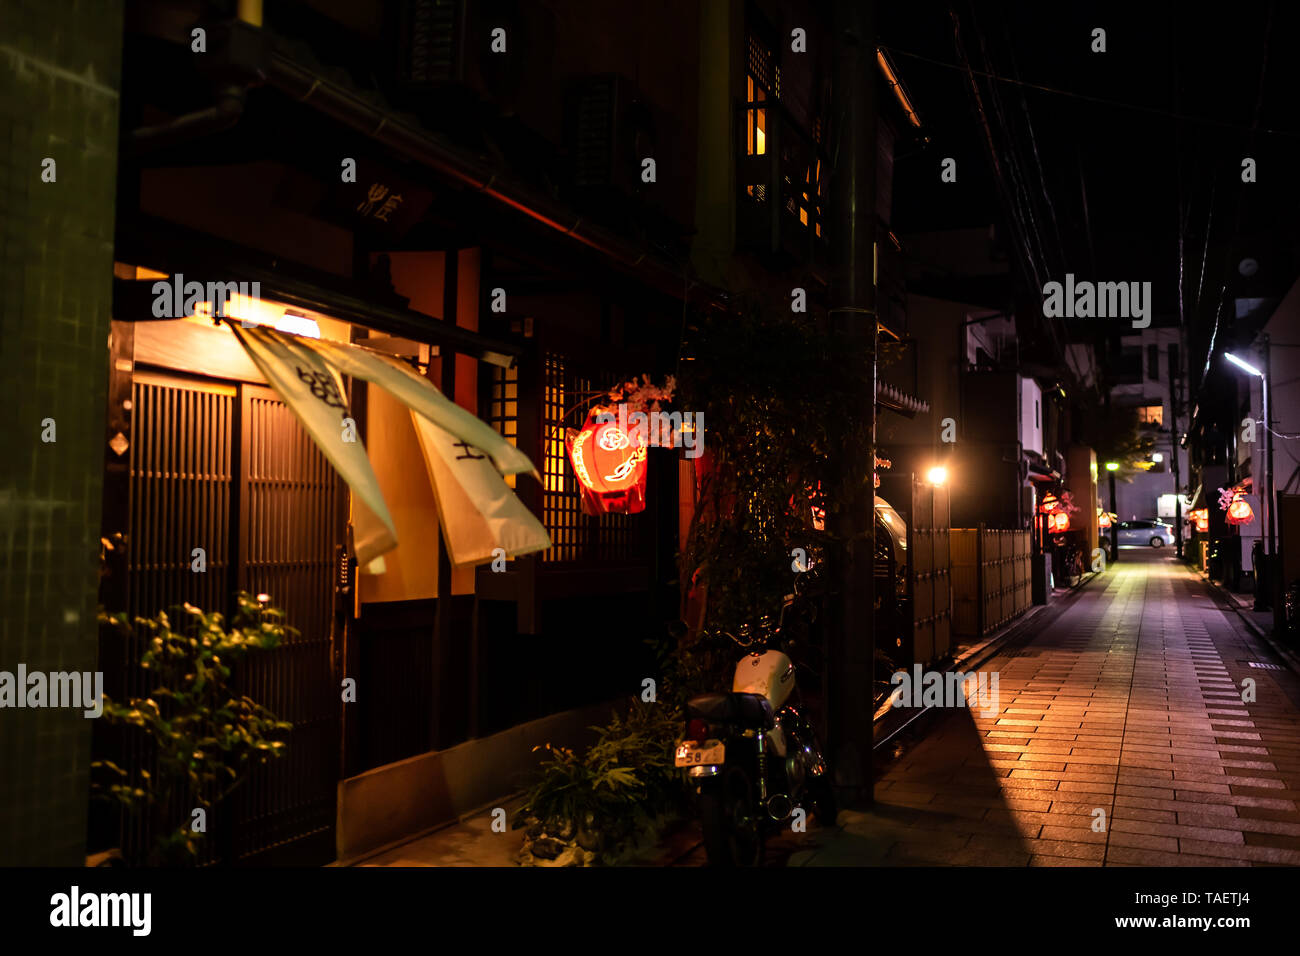 Kyoto, Japan - April 9, 2019: Narrow alley colorful empty street in Gion  district at night with red lantern and wind blowing curtains Stock Photo -  Alamy